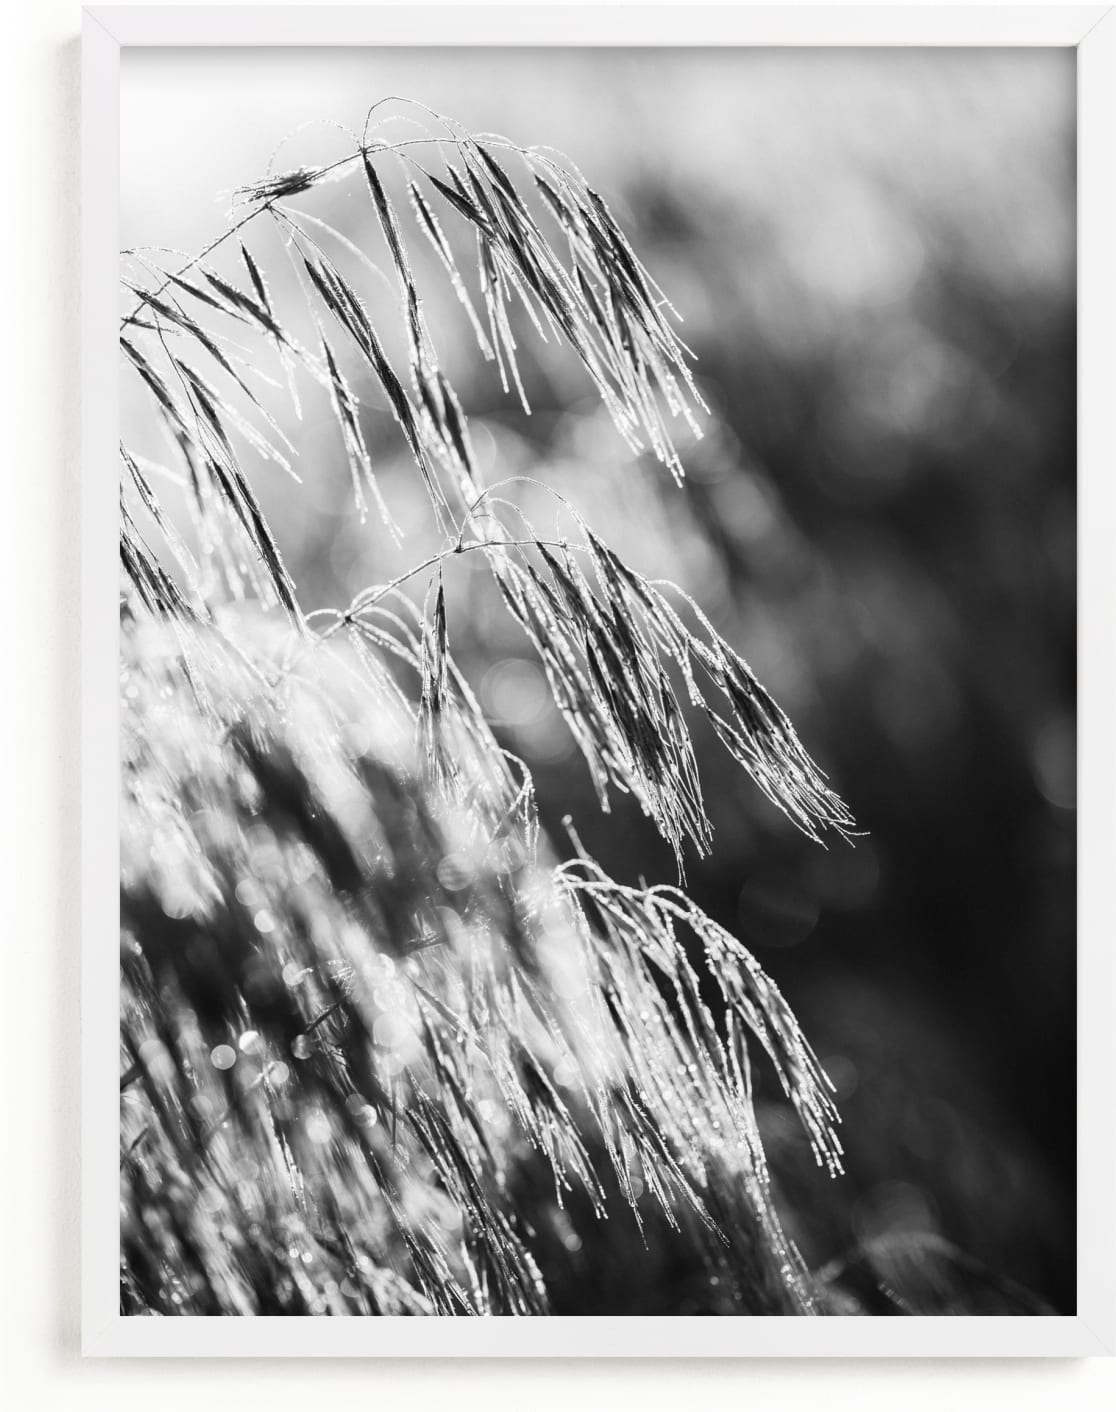 This is a black and white art by Magdalena Kucova called Dancing grass II.